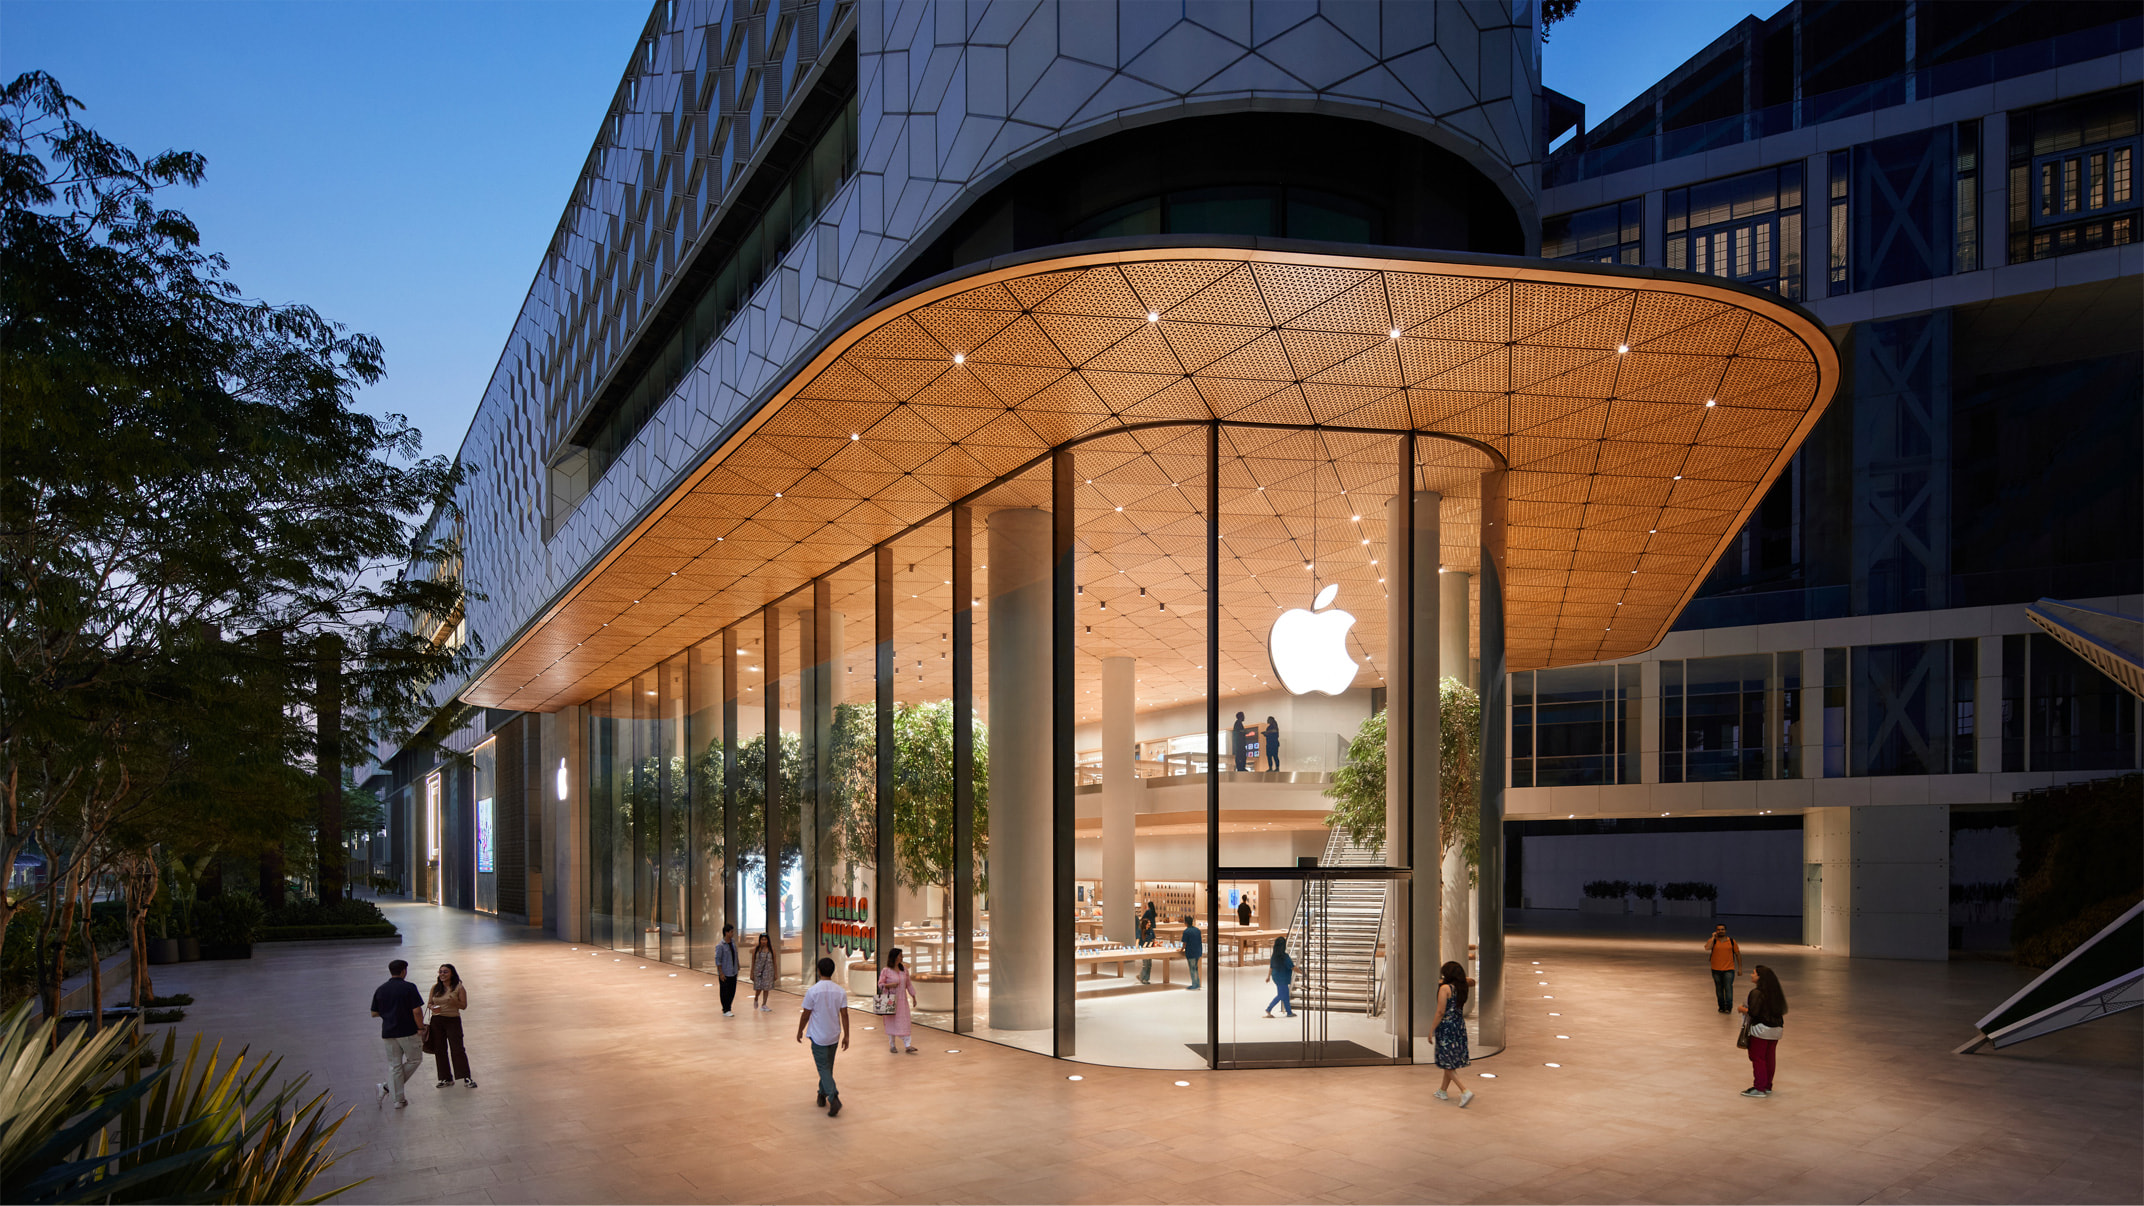 13 Apple Stores in US malls could reopen by May 2